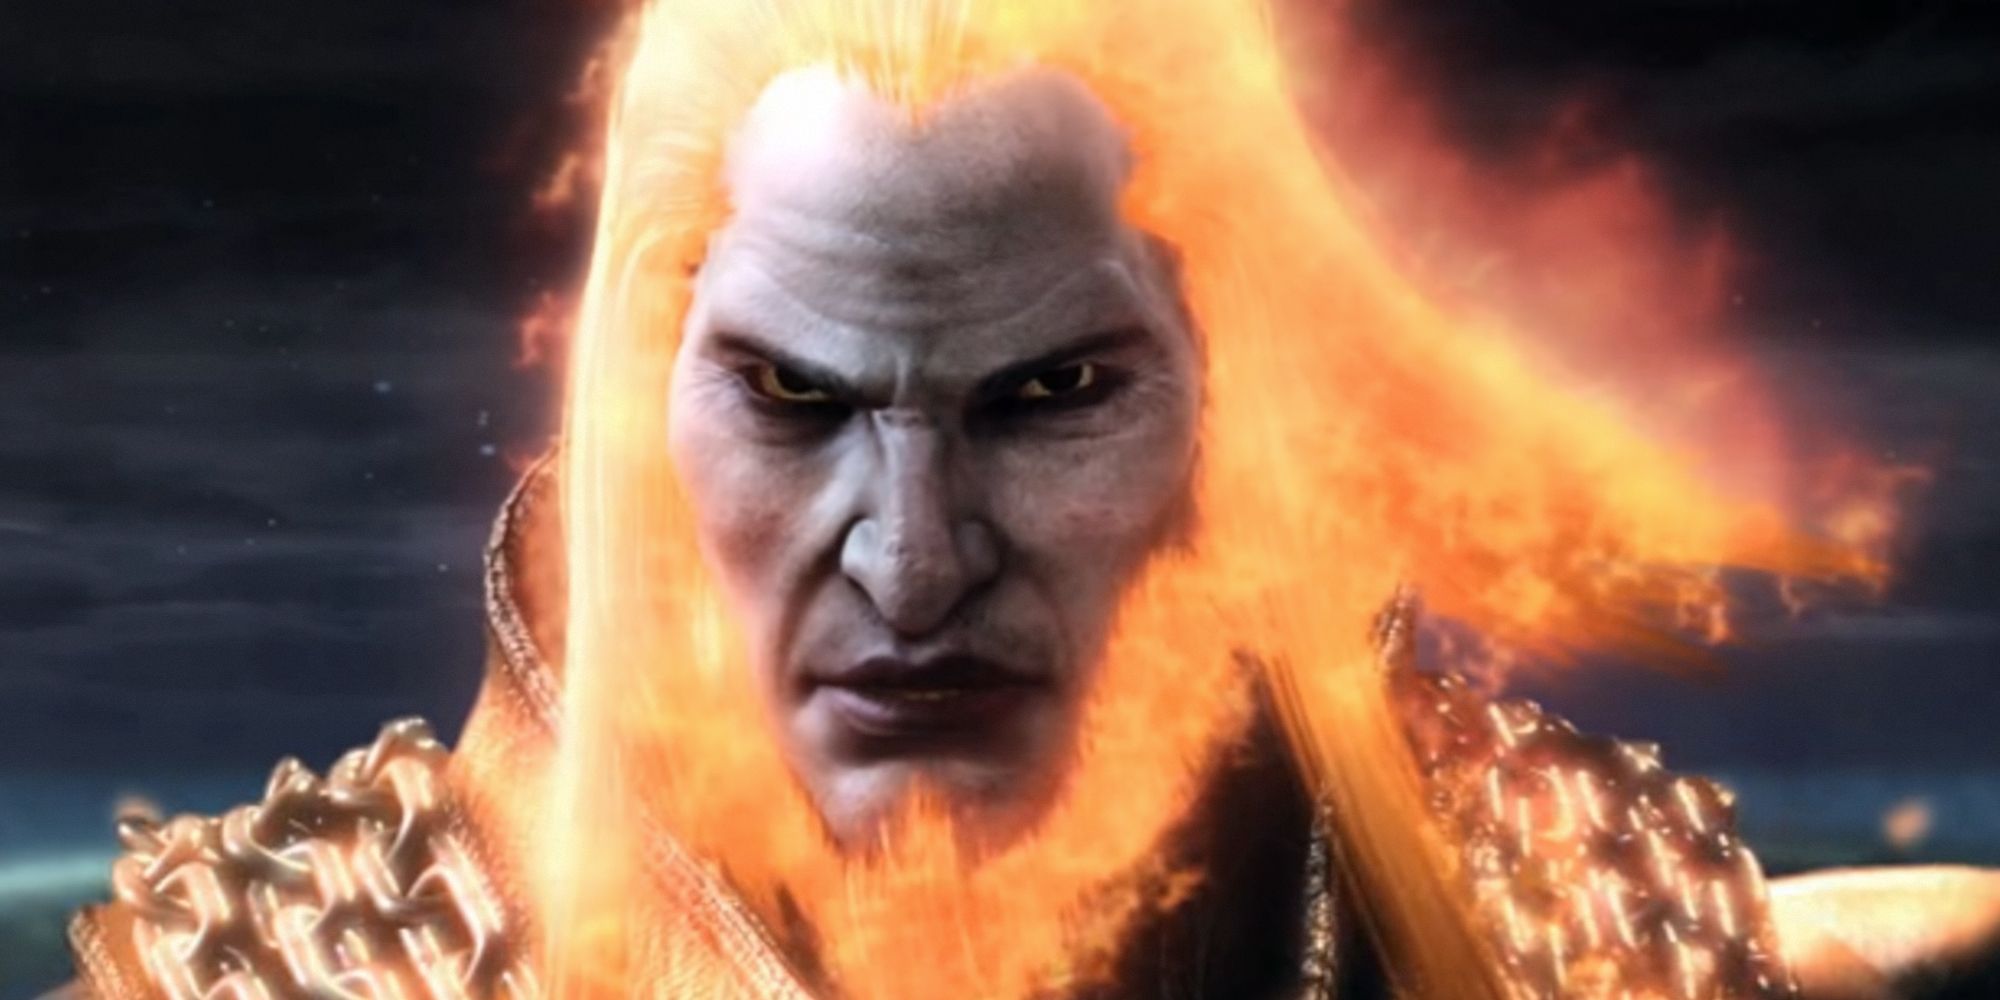 God Of War Ares boss fight. Cutscene of Ares with flaming head.